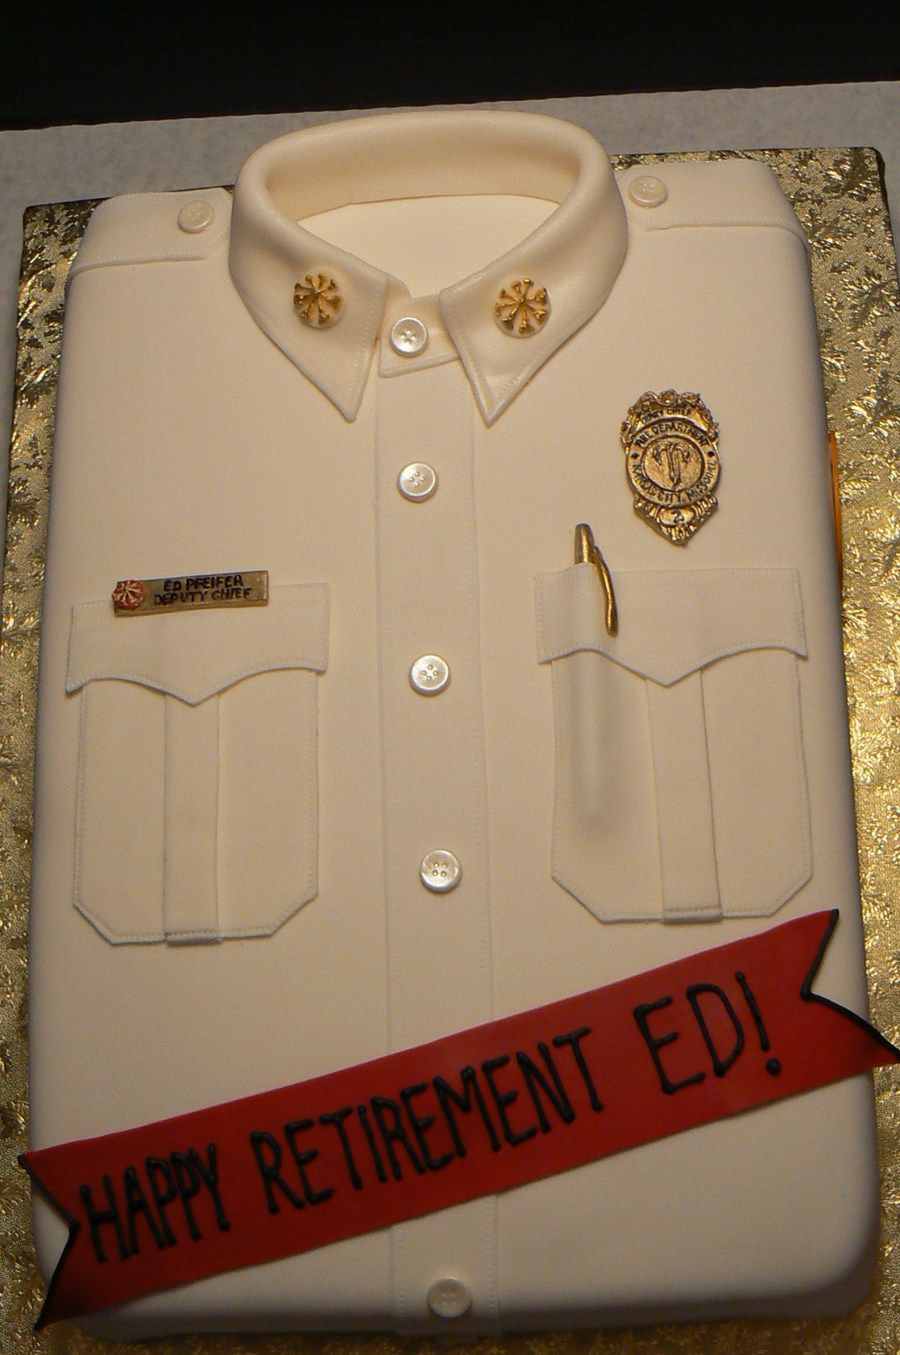 Firefighter Retirement Party Ideas
 Fire Department Retirement on Cake Central